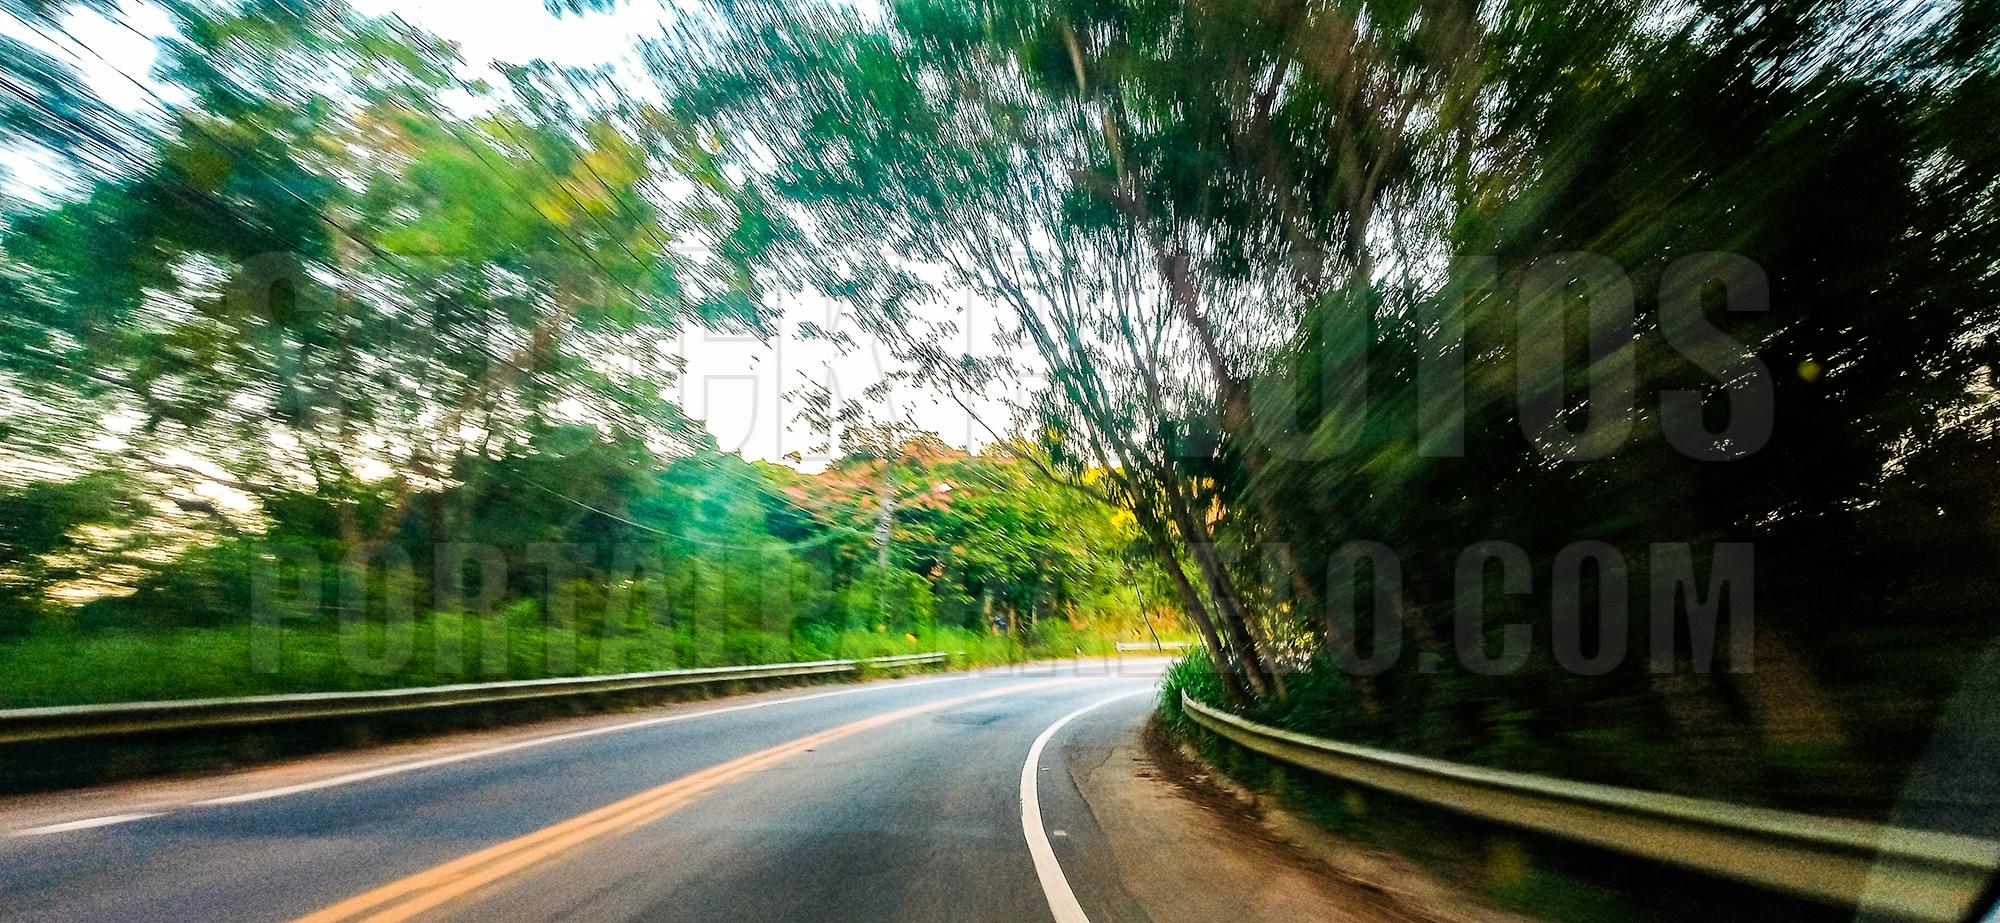 Driving at high speed along the road with many trees and Atlantic forest.